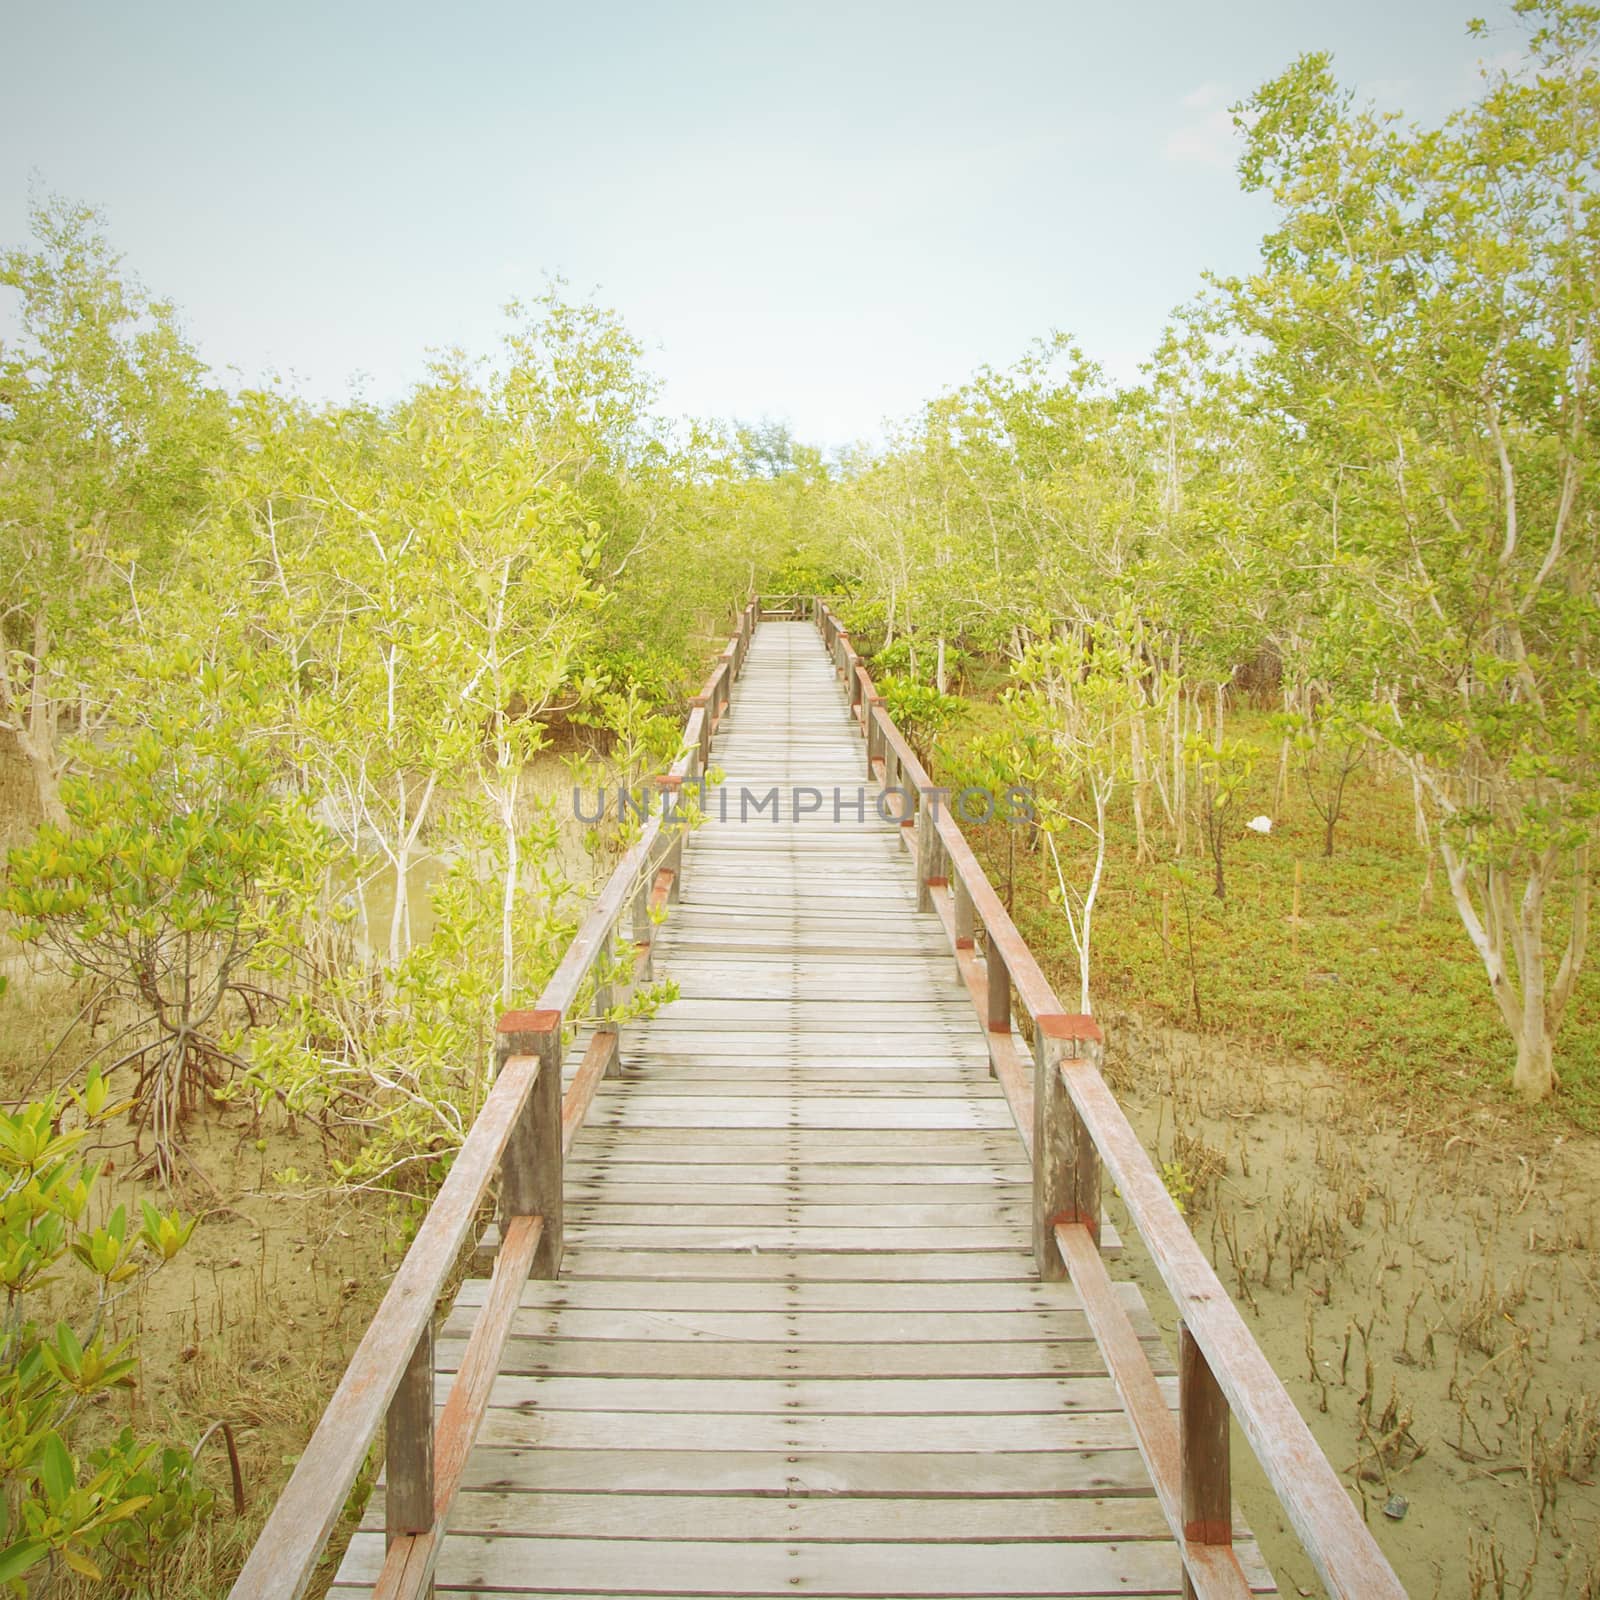 A wooden bridge on mangrove forest by jakgree